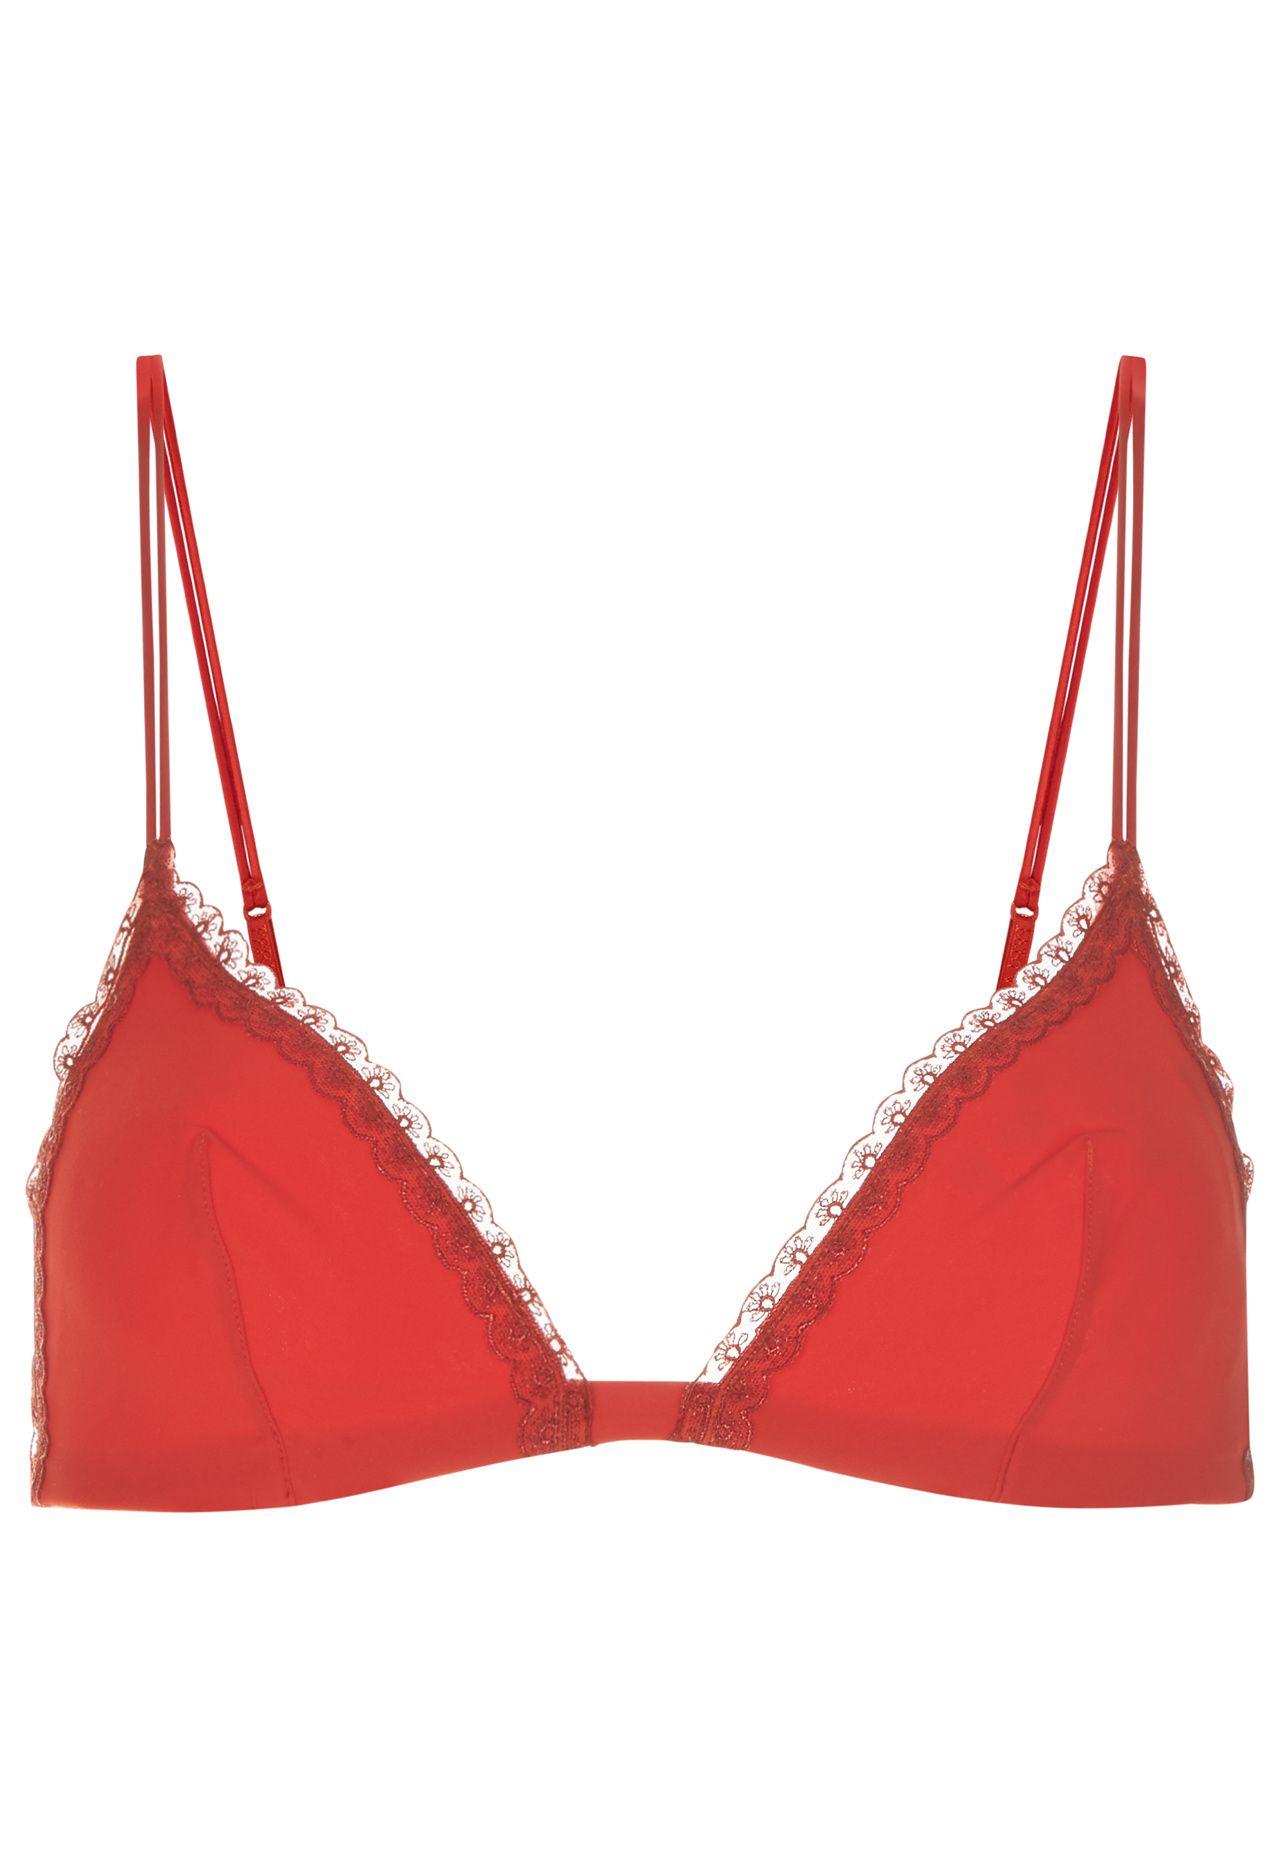 Red Triangle Clothing Logo - Moonstone Poppy Red Triangle Bra With Chintz Embroidery